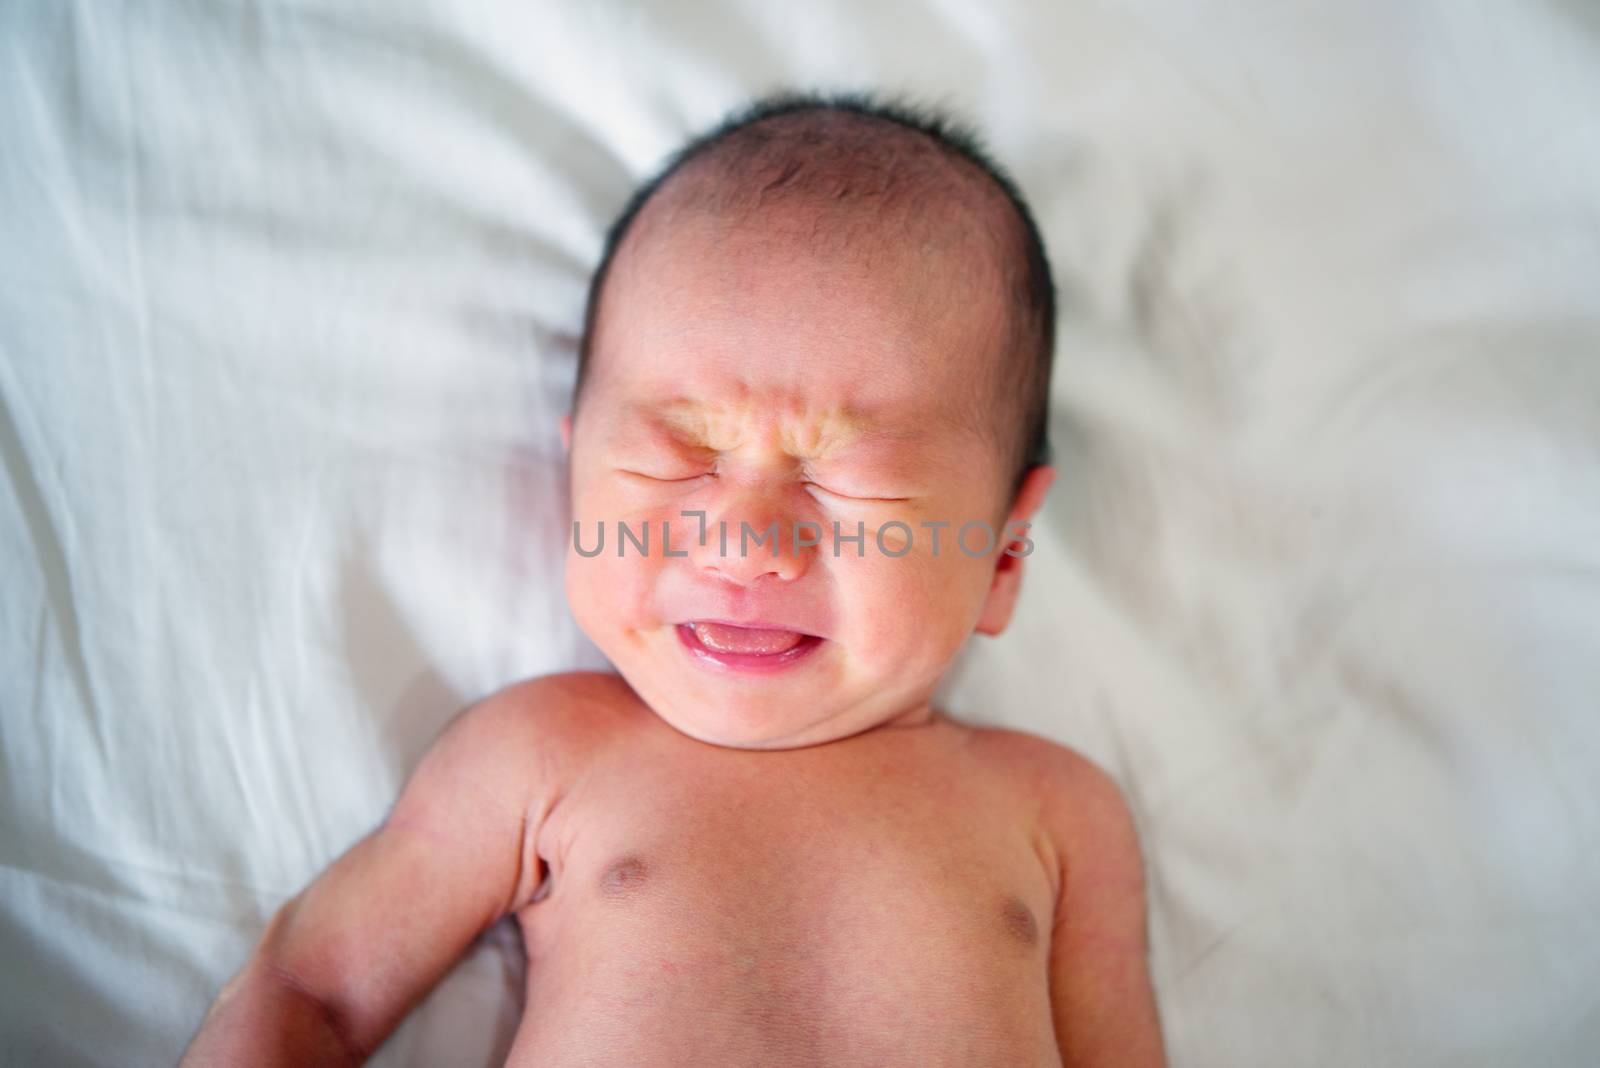 Asian newborn crying baby boy. 7 days old new born child tired and hungry in bed. 